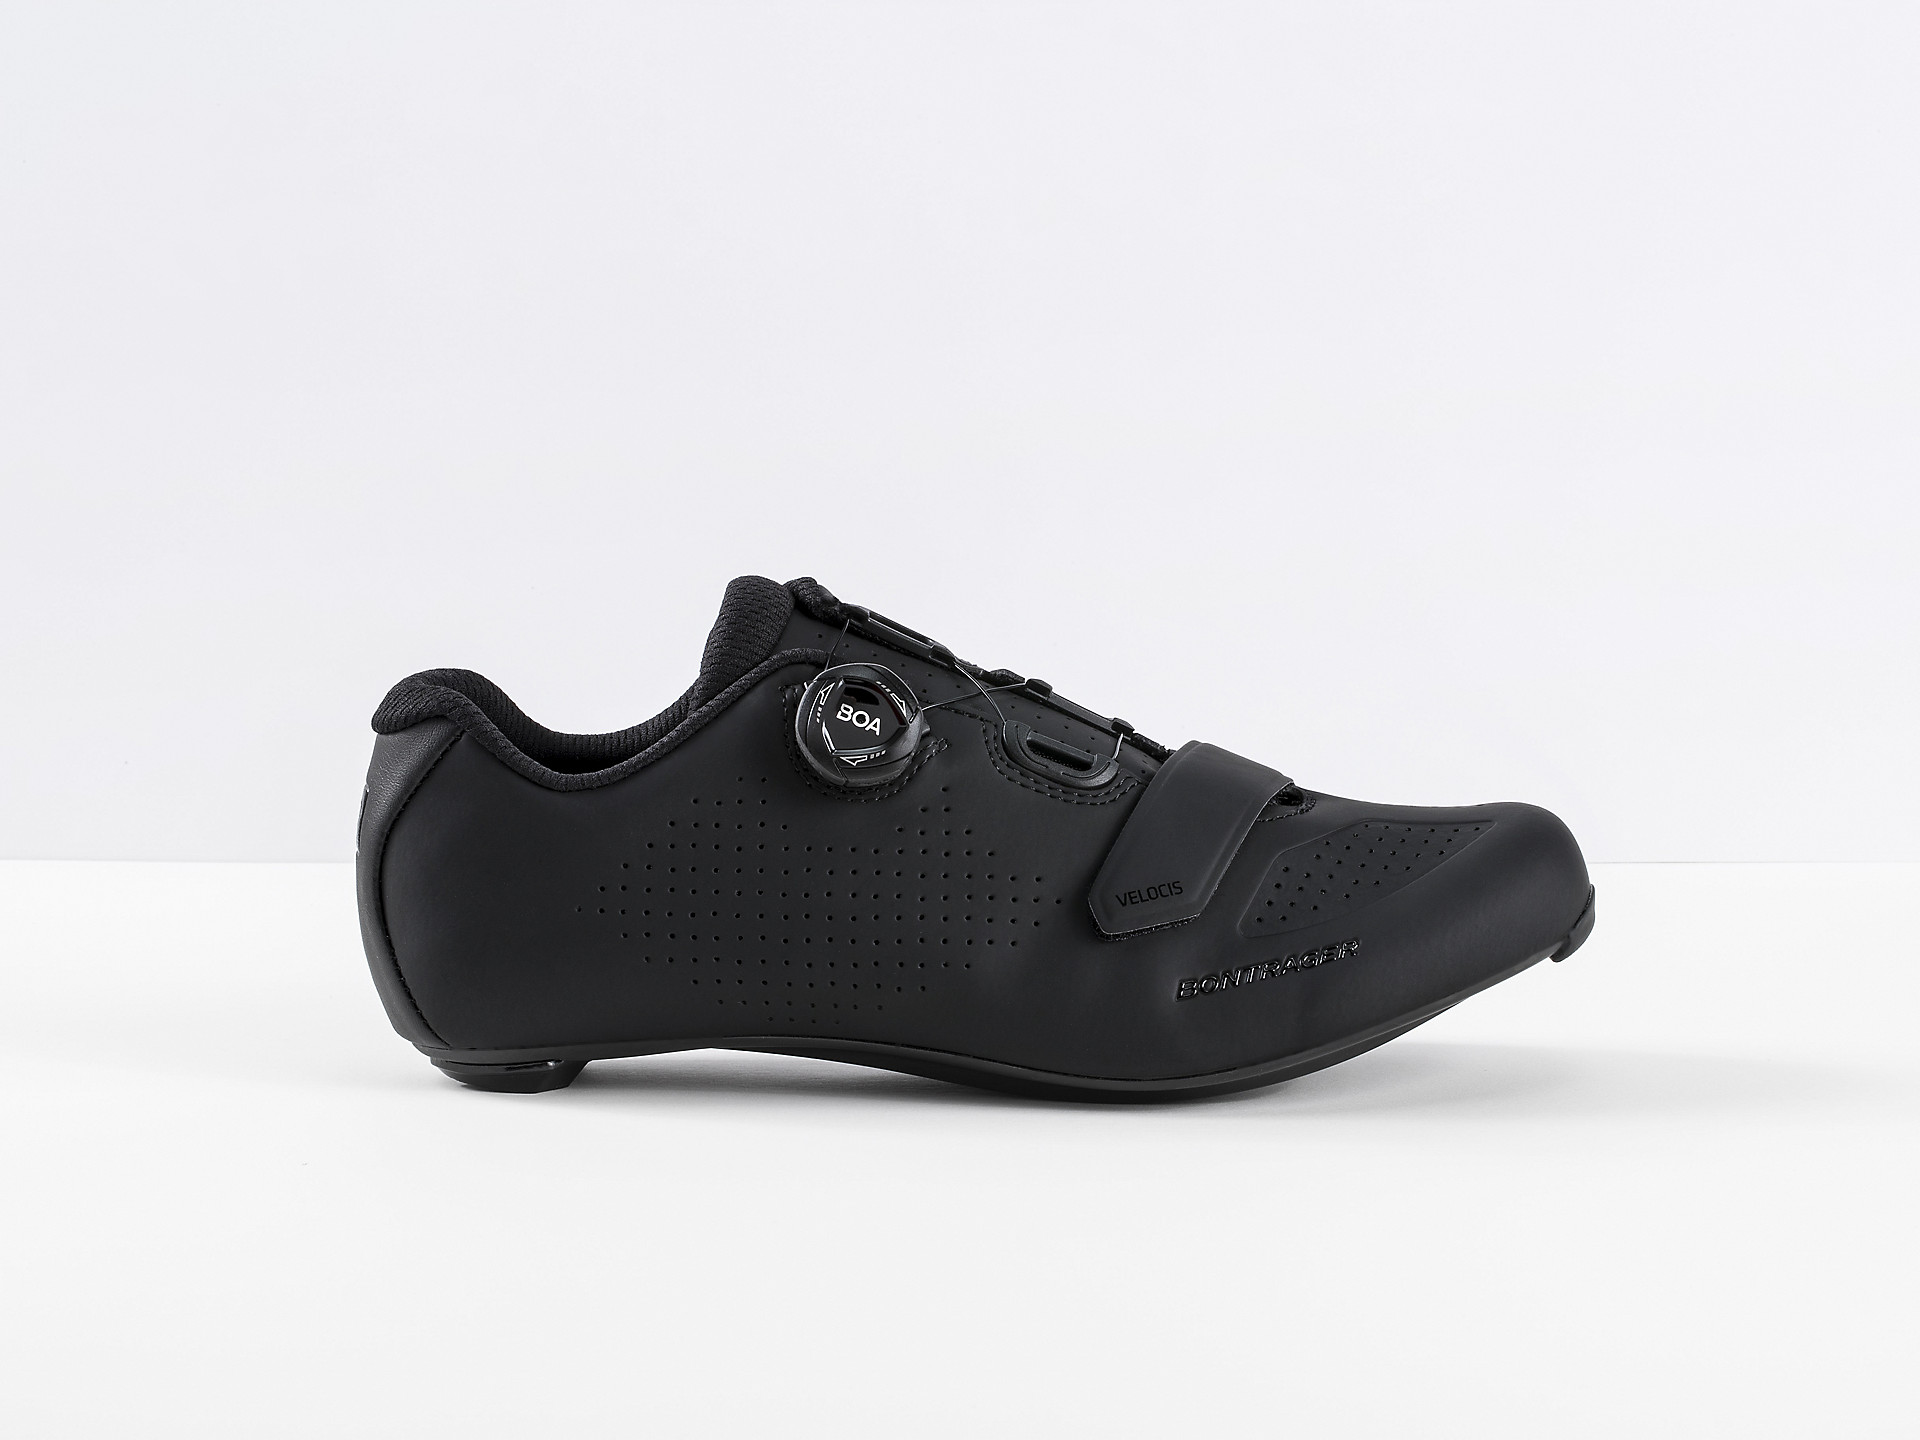 <a href="https://cycles-clement.be/product/bont-chaussures-velocis-44-black/">BONT CHAUSSURES VELOCIS  44 BLACK</a>